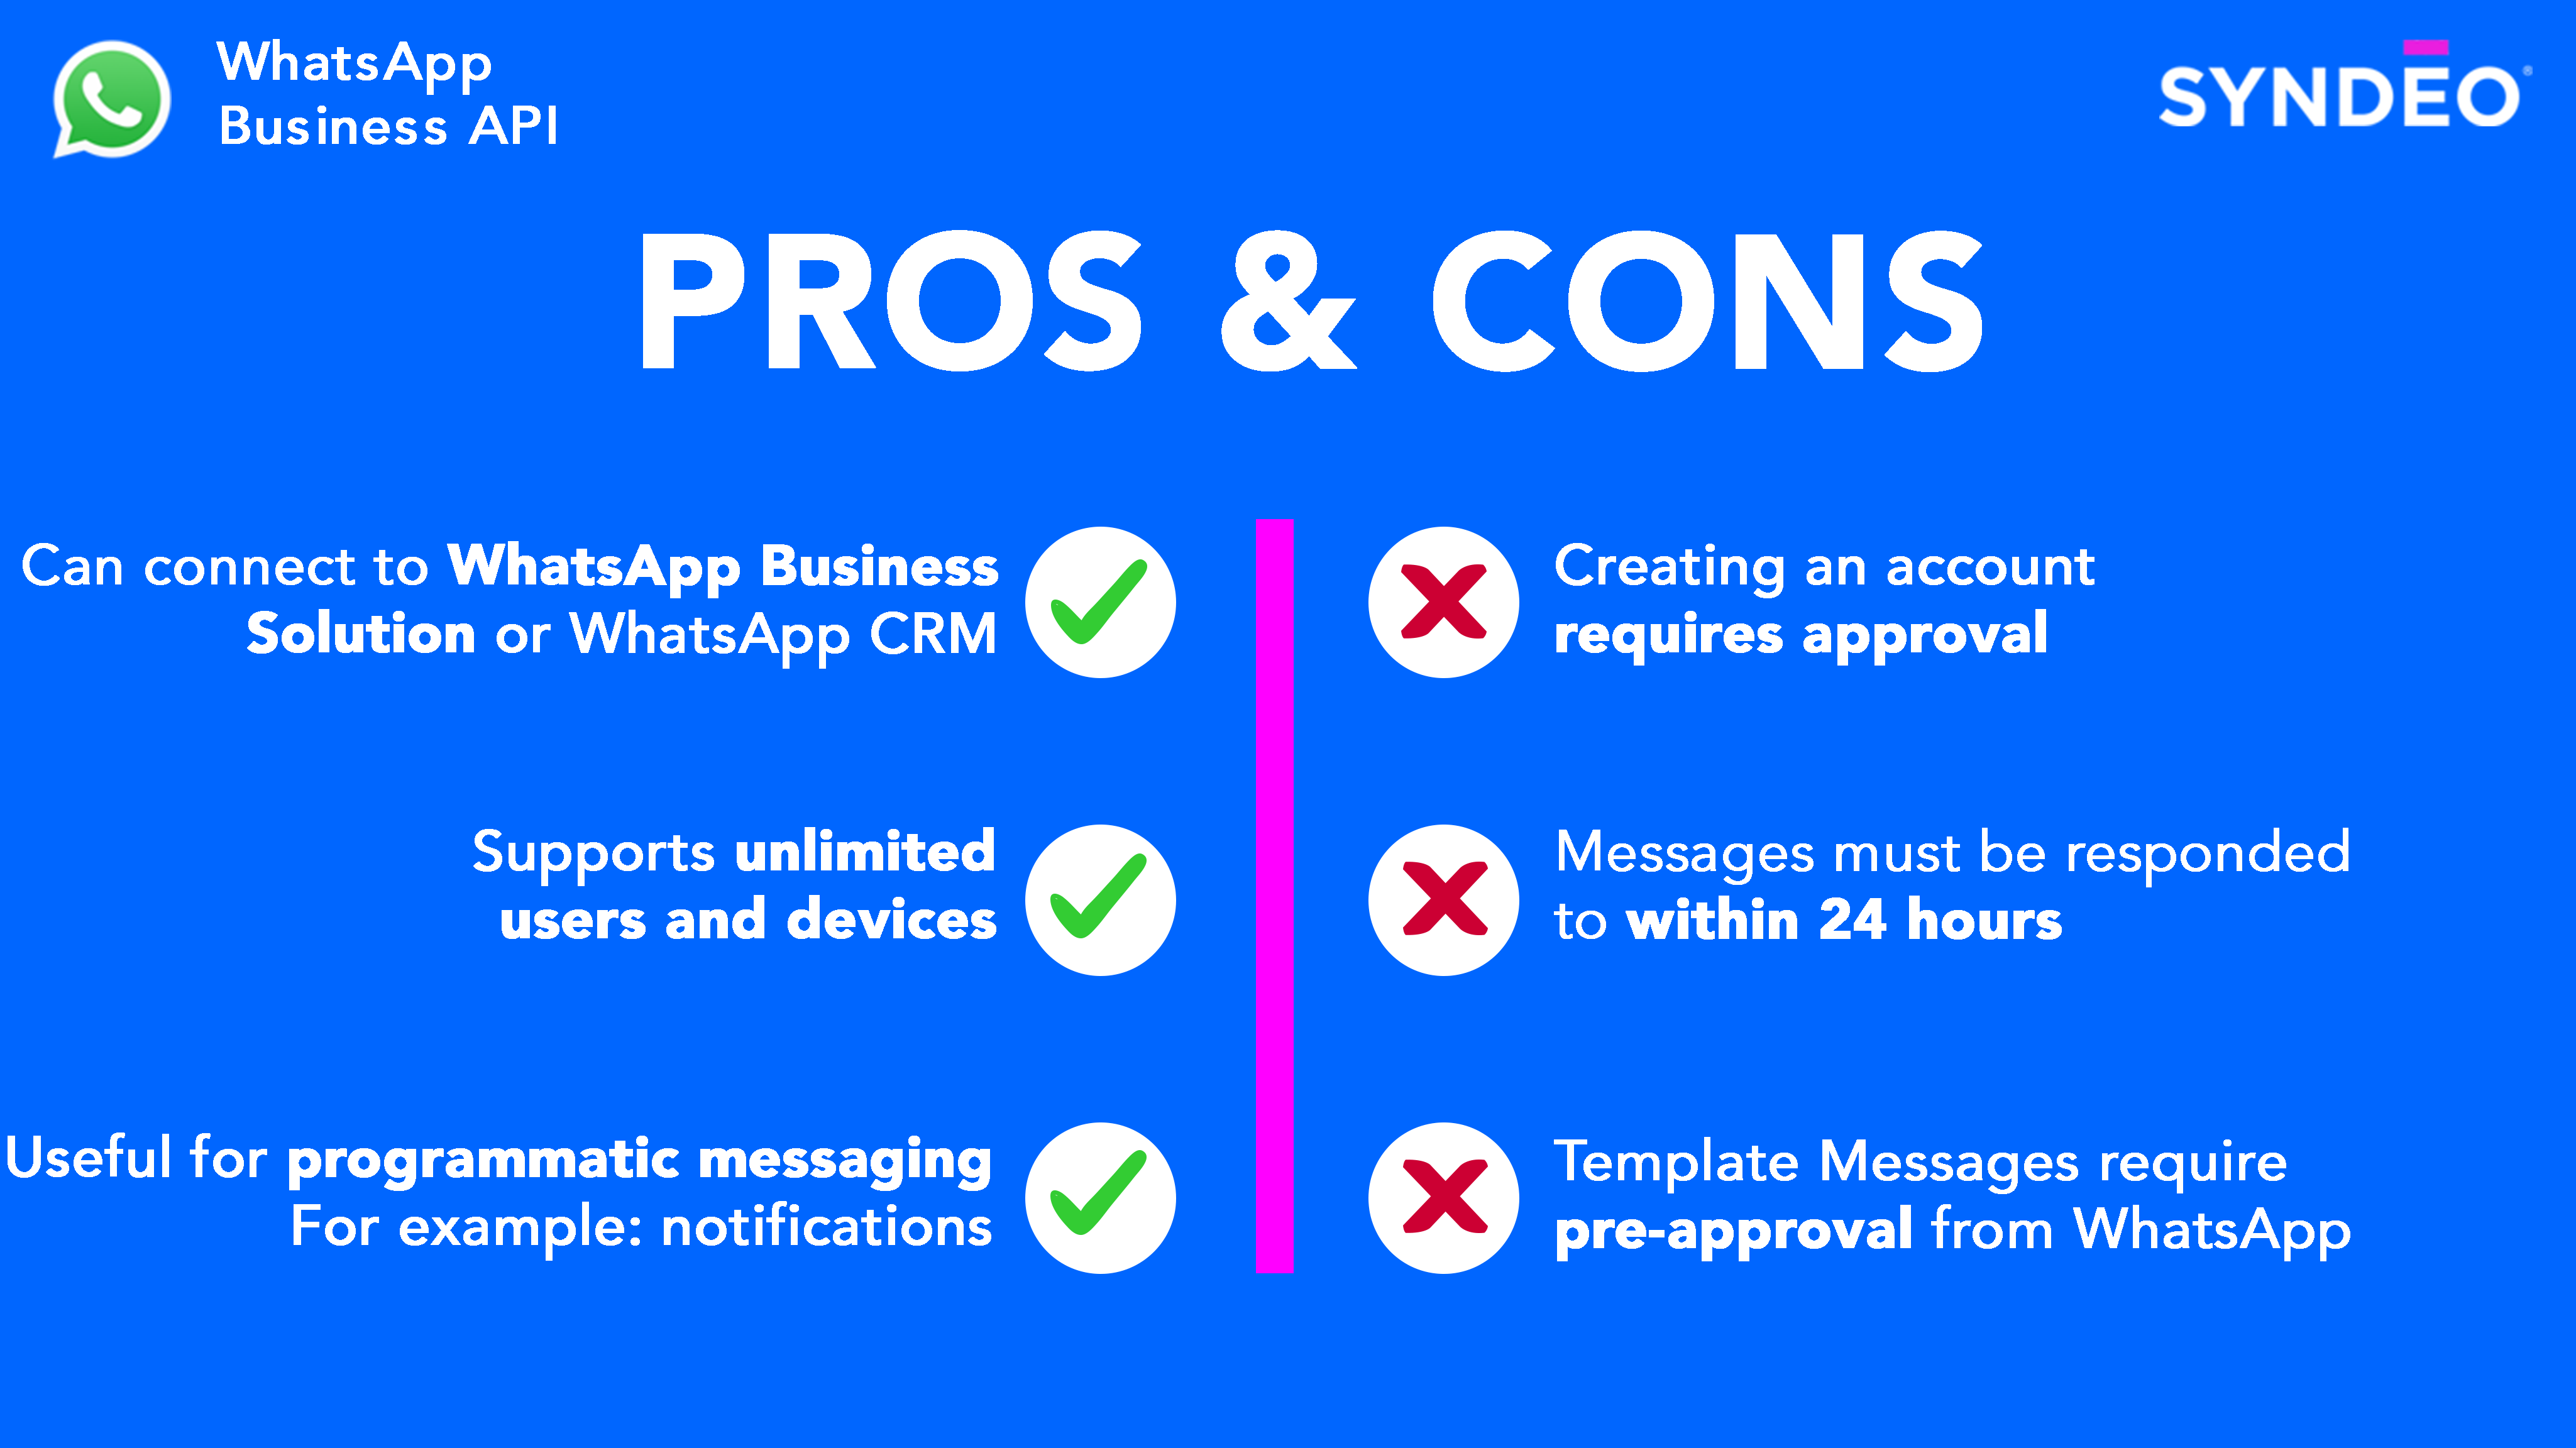 WhatsApp Pros and Cons #2